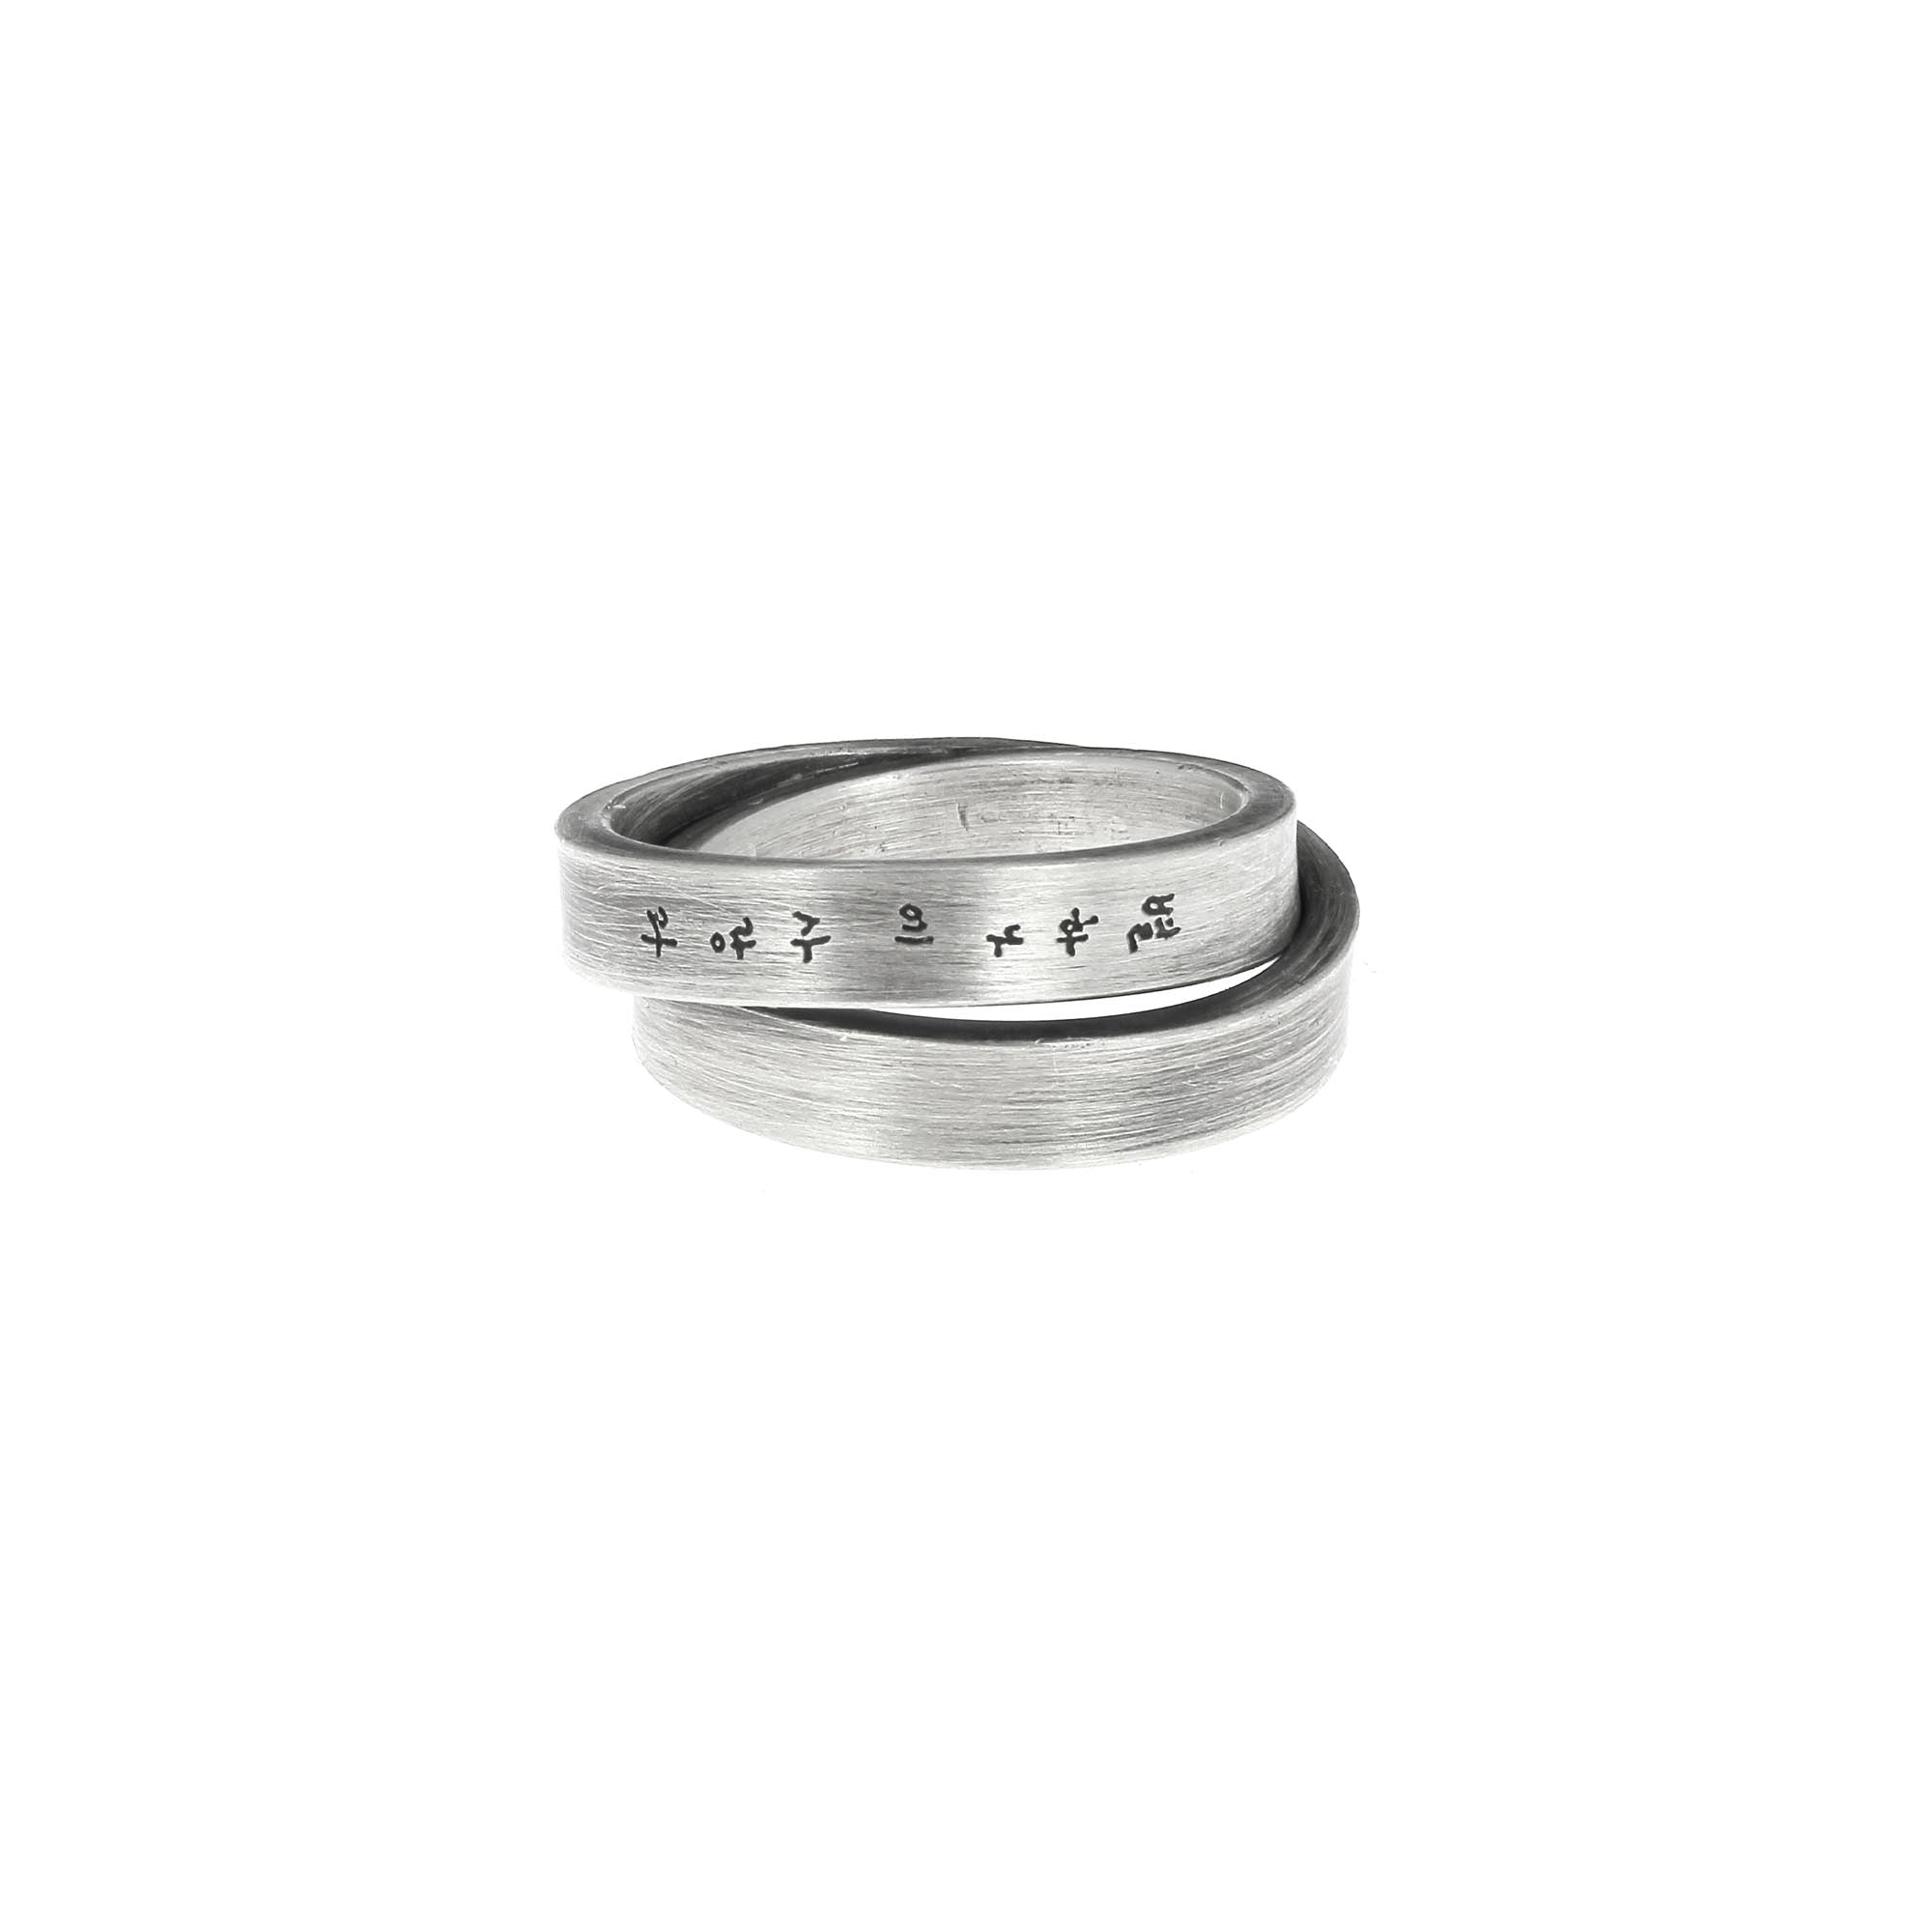 Double Band Ring with Poem